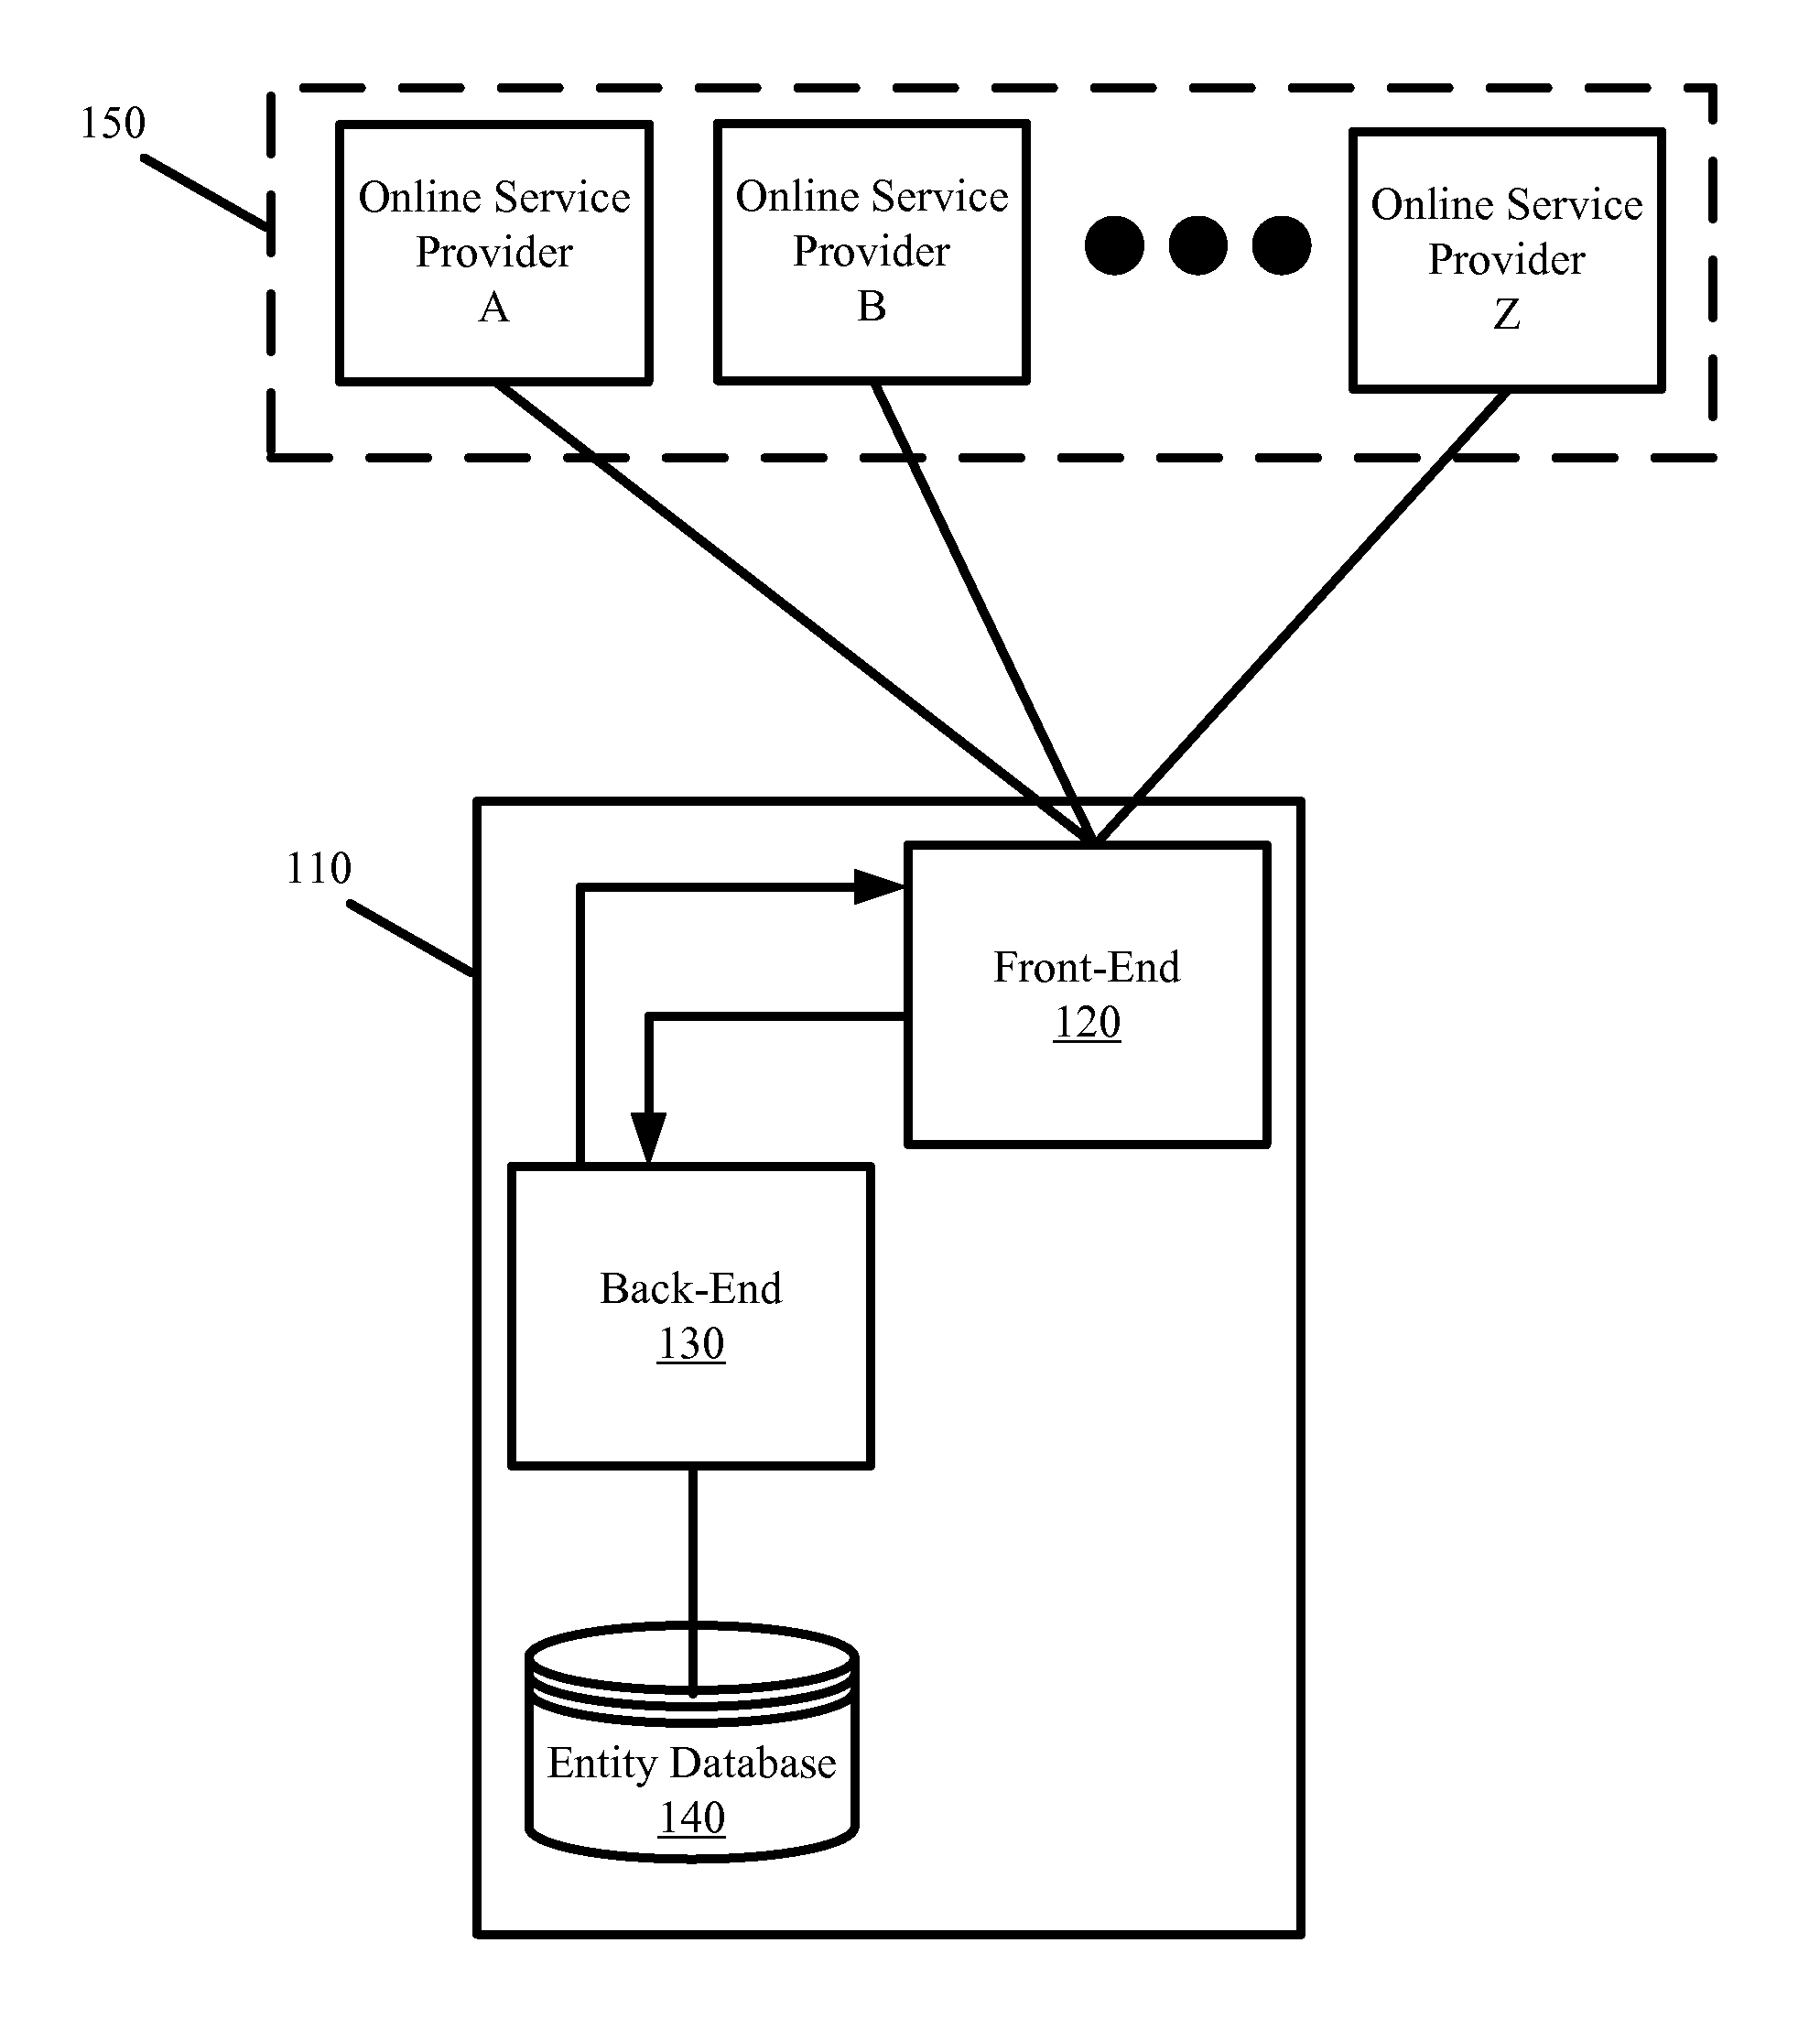 Single System for Authenticating Entities Across Different Third Party Platforms